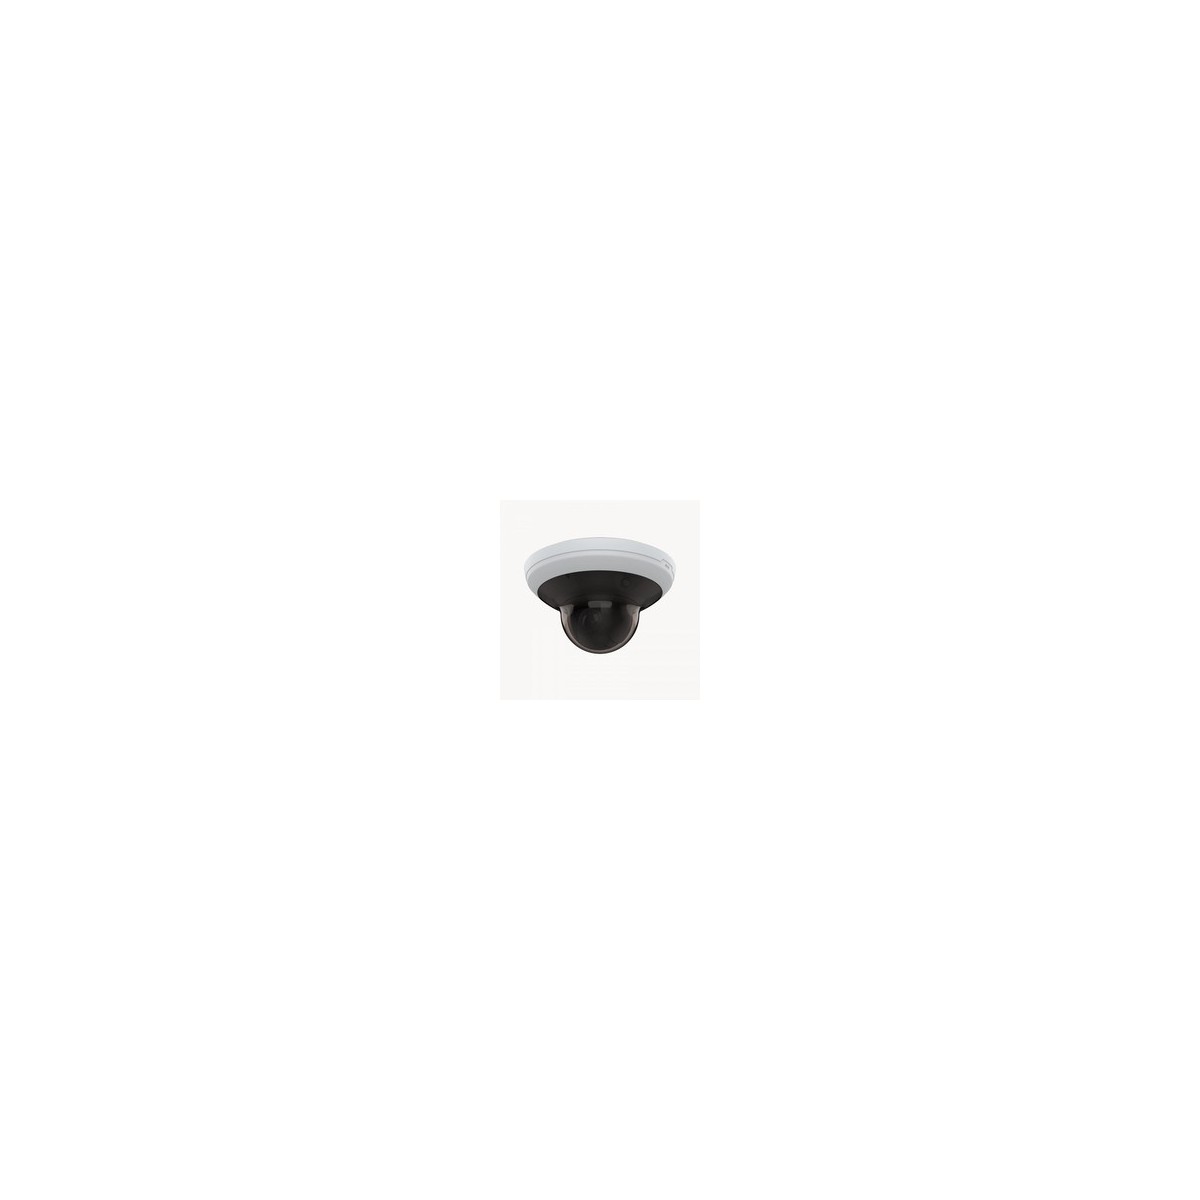 Axis 02187-001 - IP security camera - Indoor - Wired - Ceiling - Black - White - Bulb